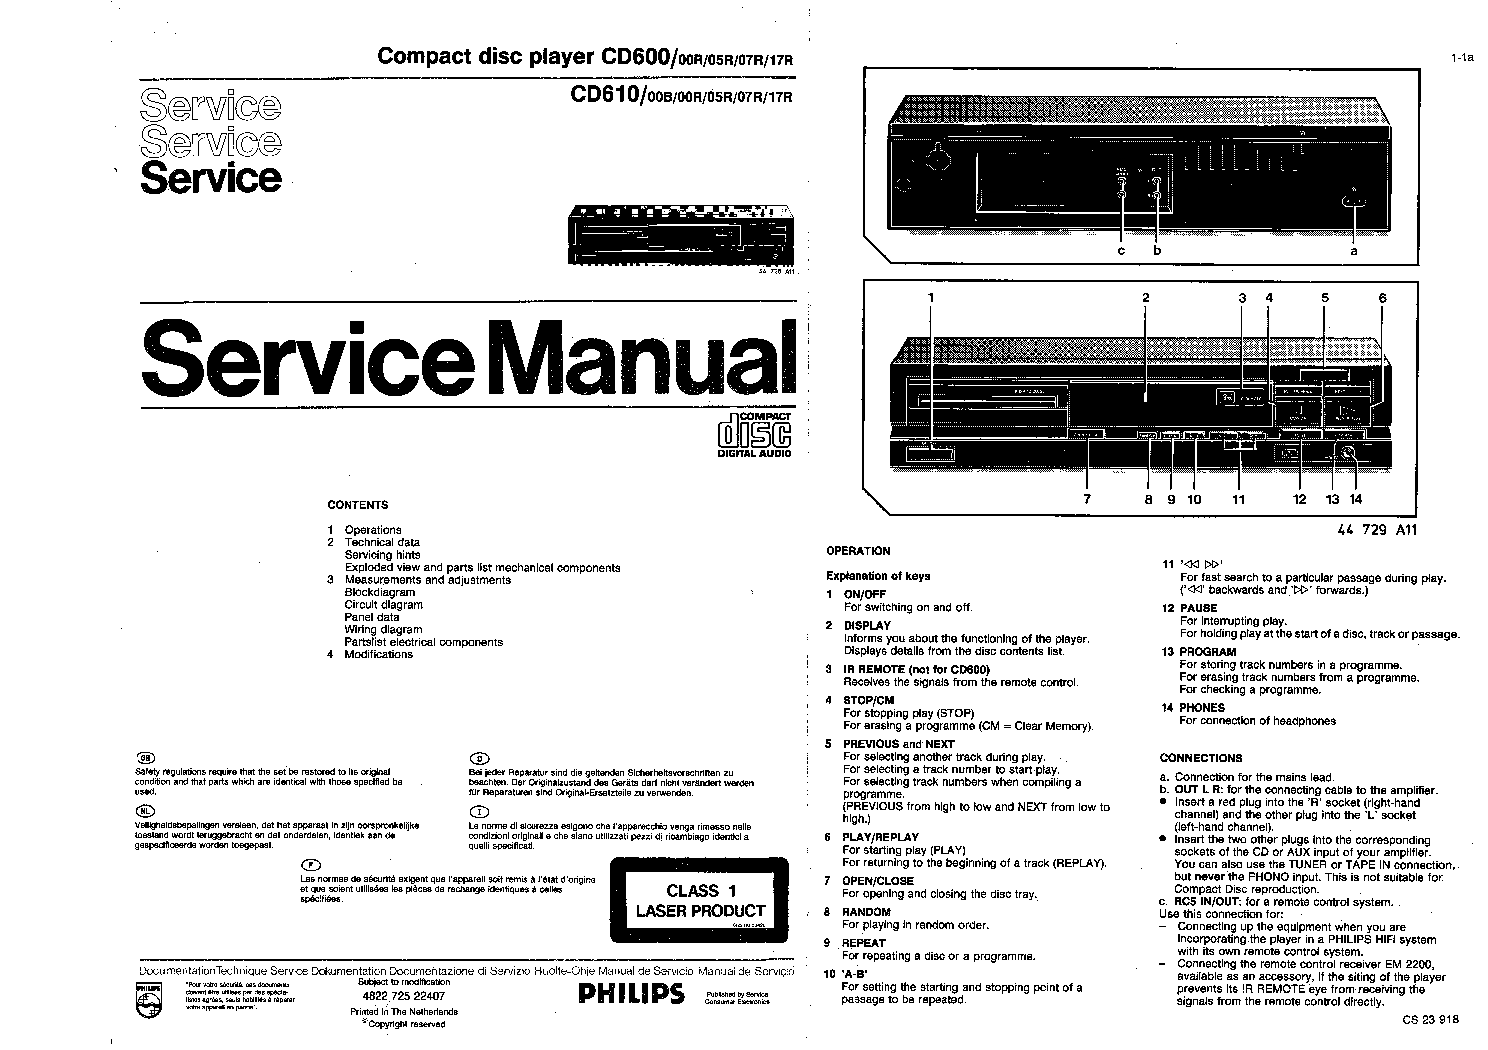 PHILIPS CD600-00R-05R-07R-17R CD610-00B-00R-05R-07R-17R SM service manual (1st page)